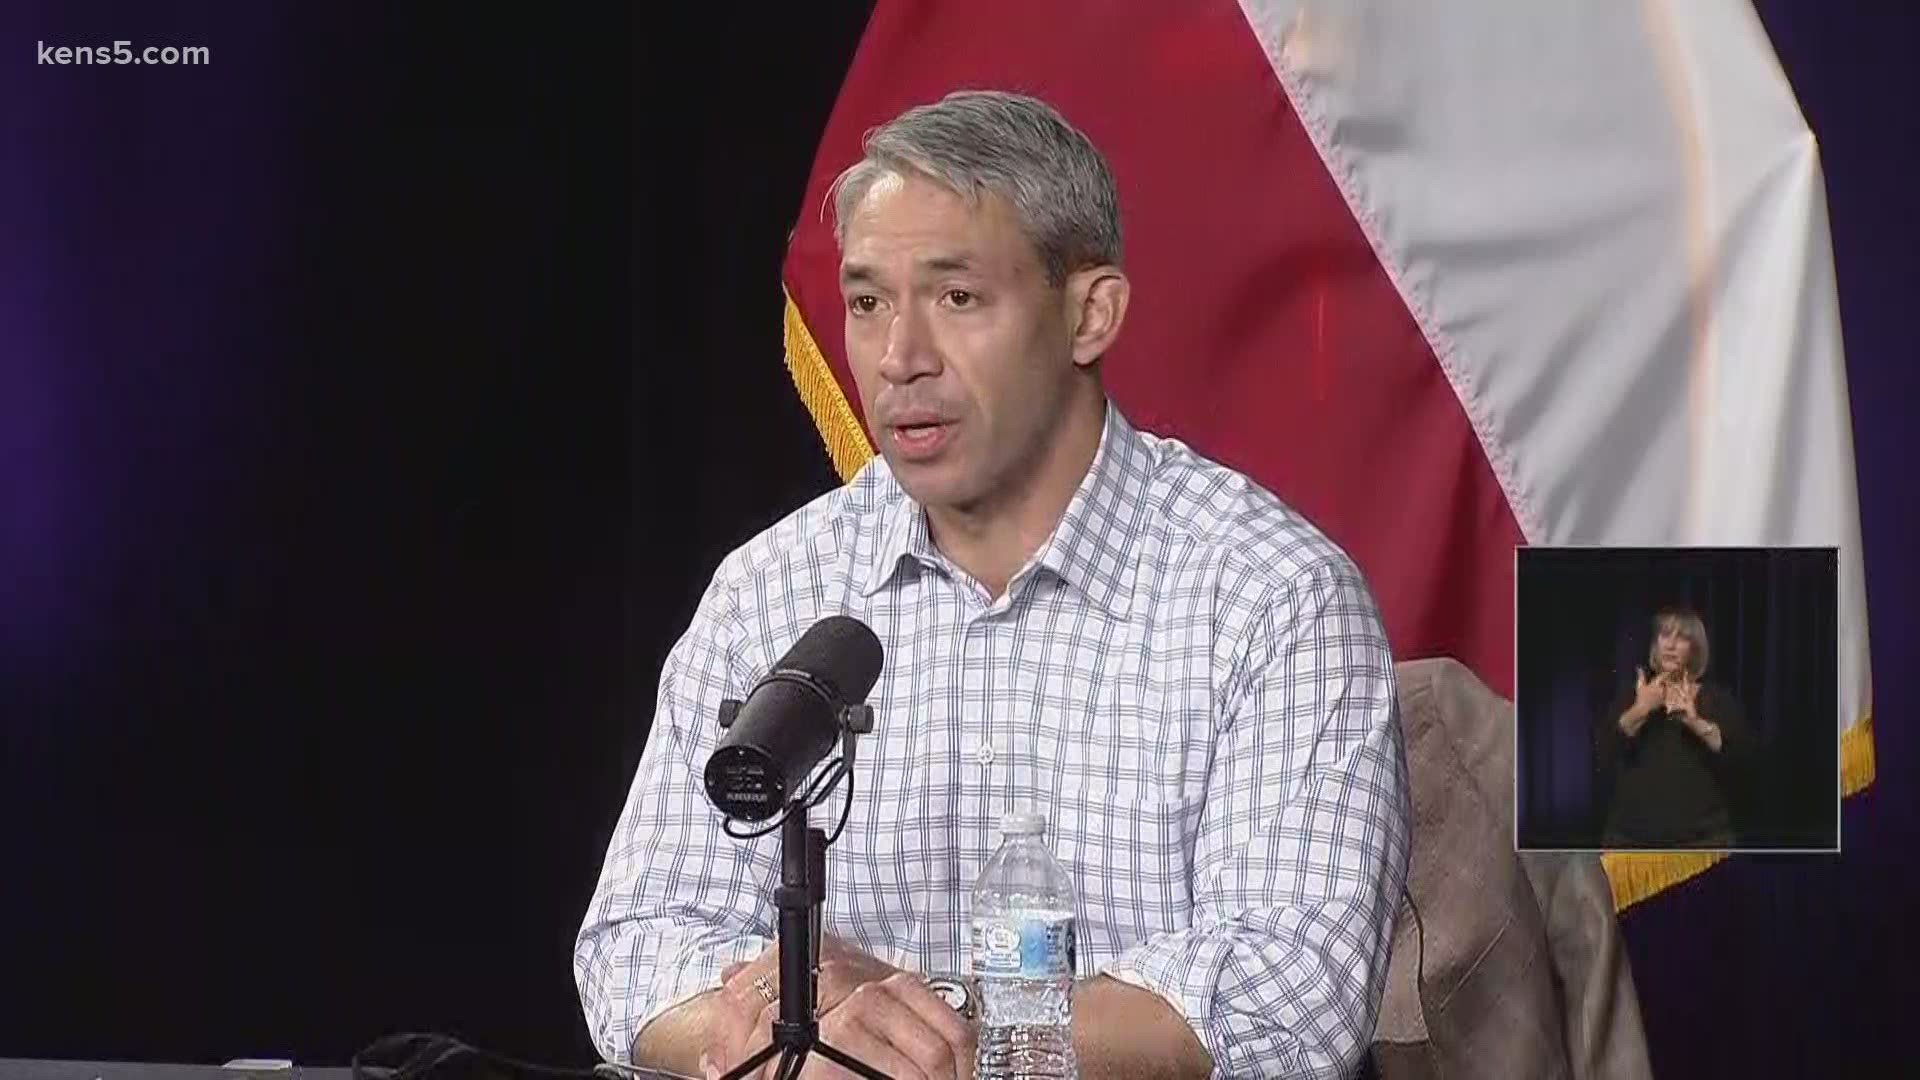 Mayor Nirenberg reported 730 new cases, bringing the total in the county to 90,220. No new deaths were reported, so the local death toll remains at 1,406.